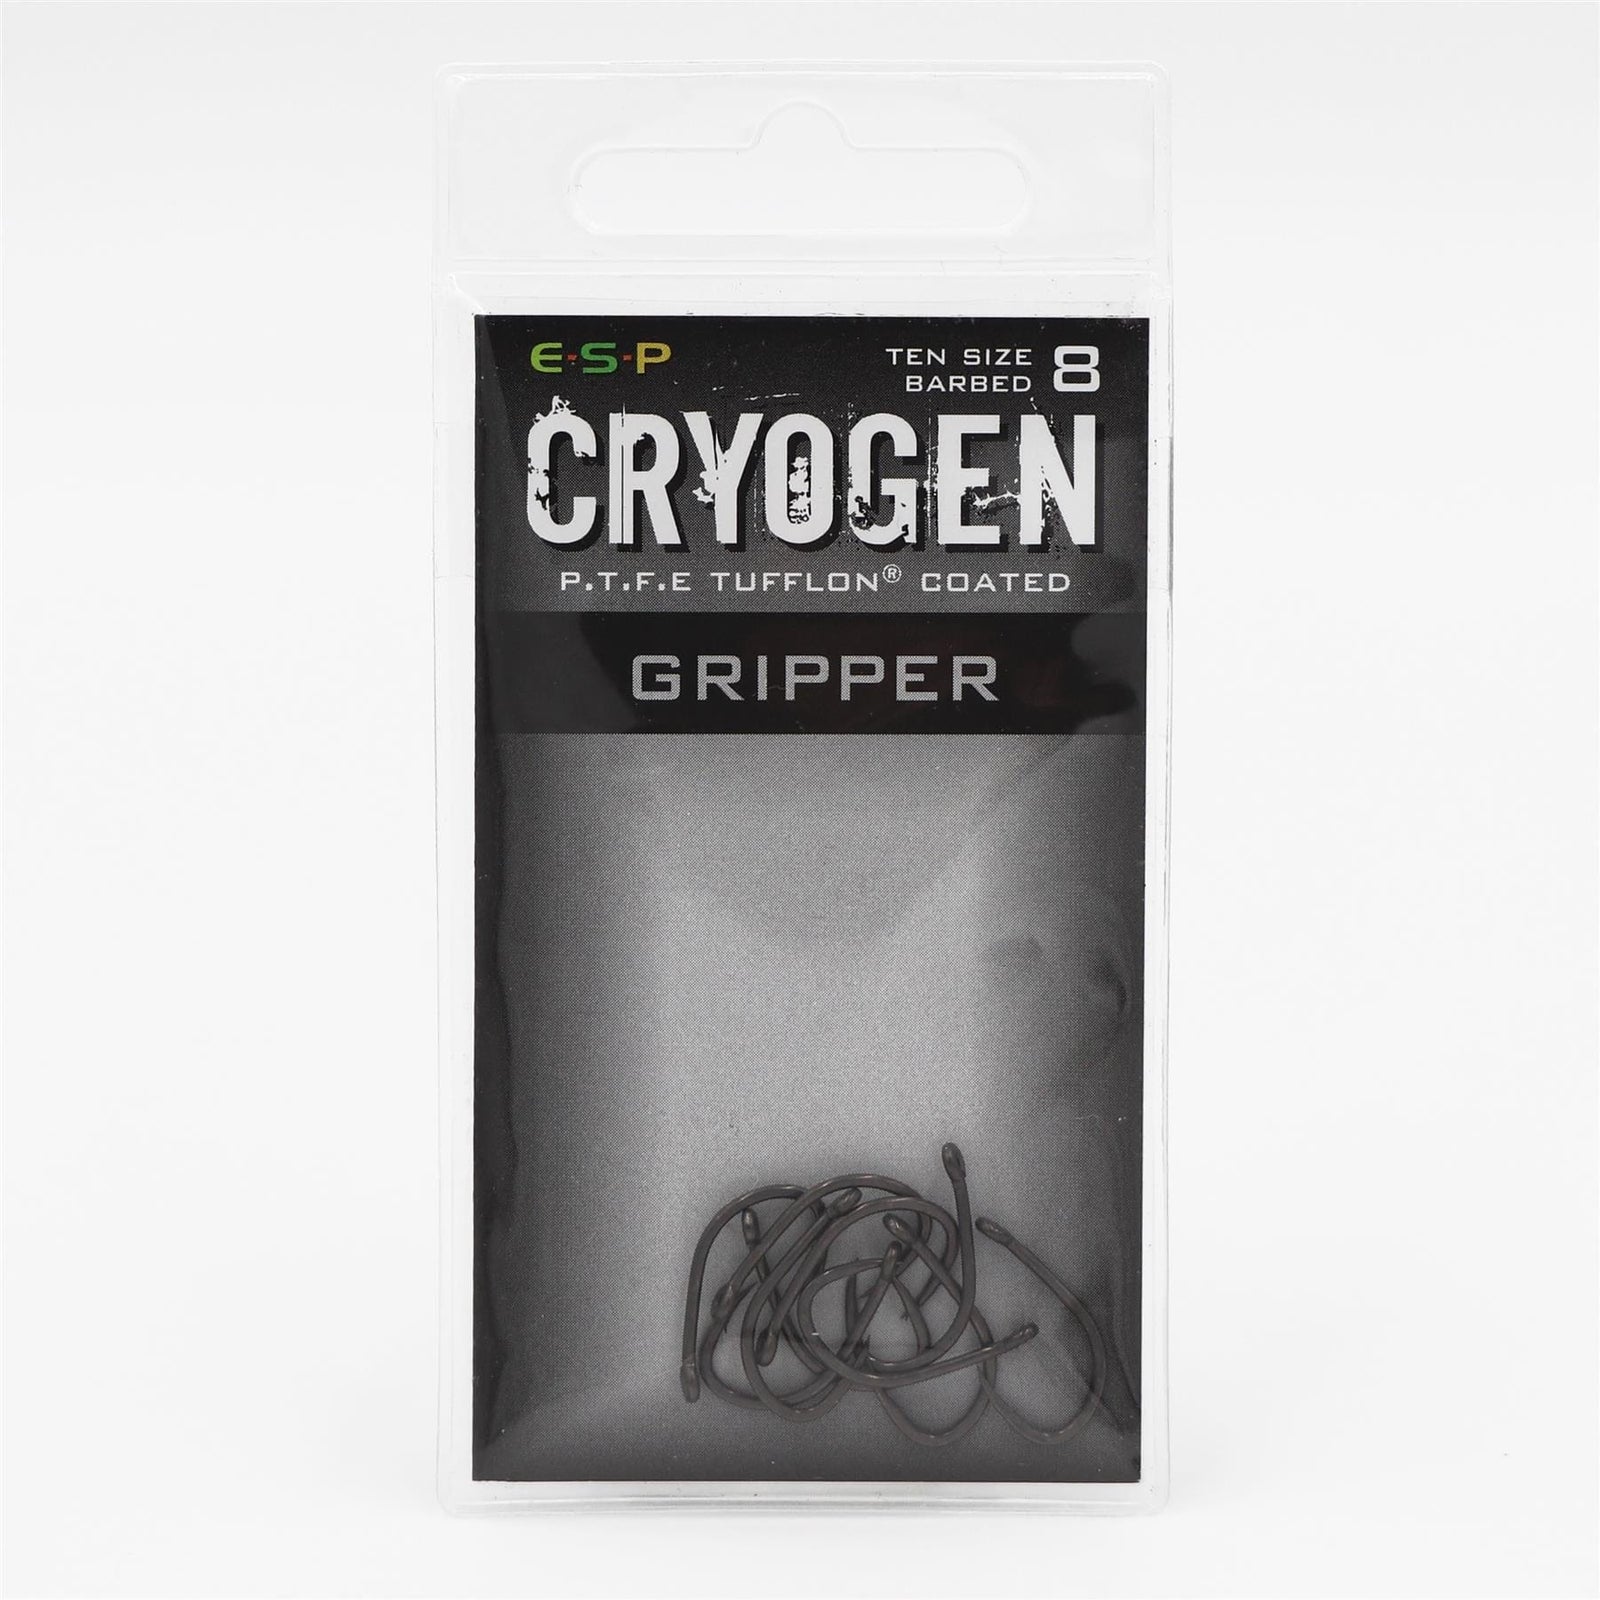 ESP Cryogen Classic Barbless Hooks - All Sizes - Rods and Lines